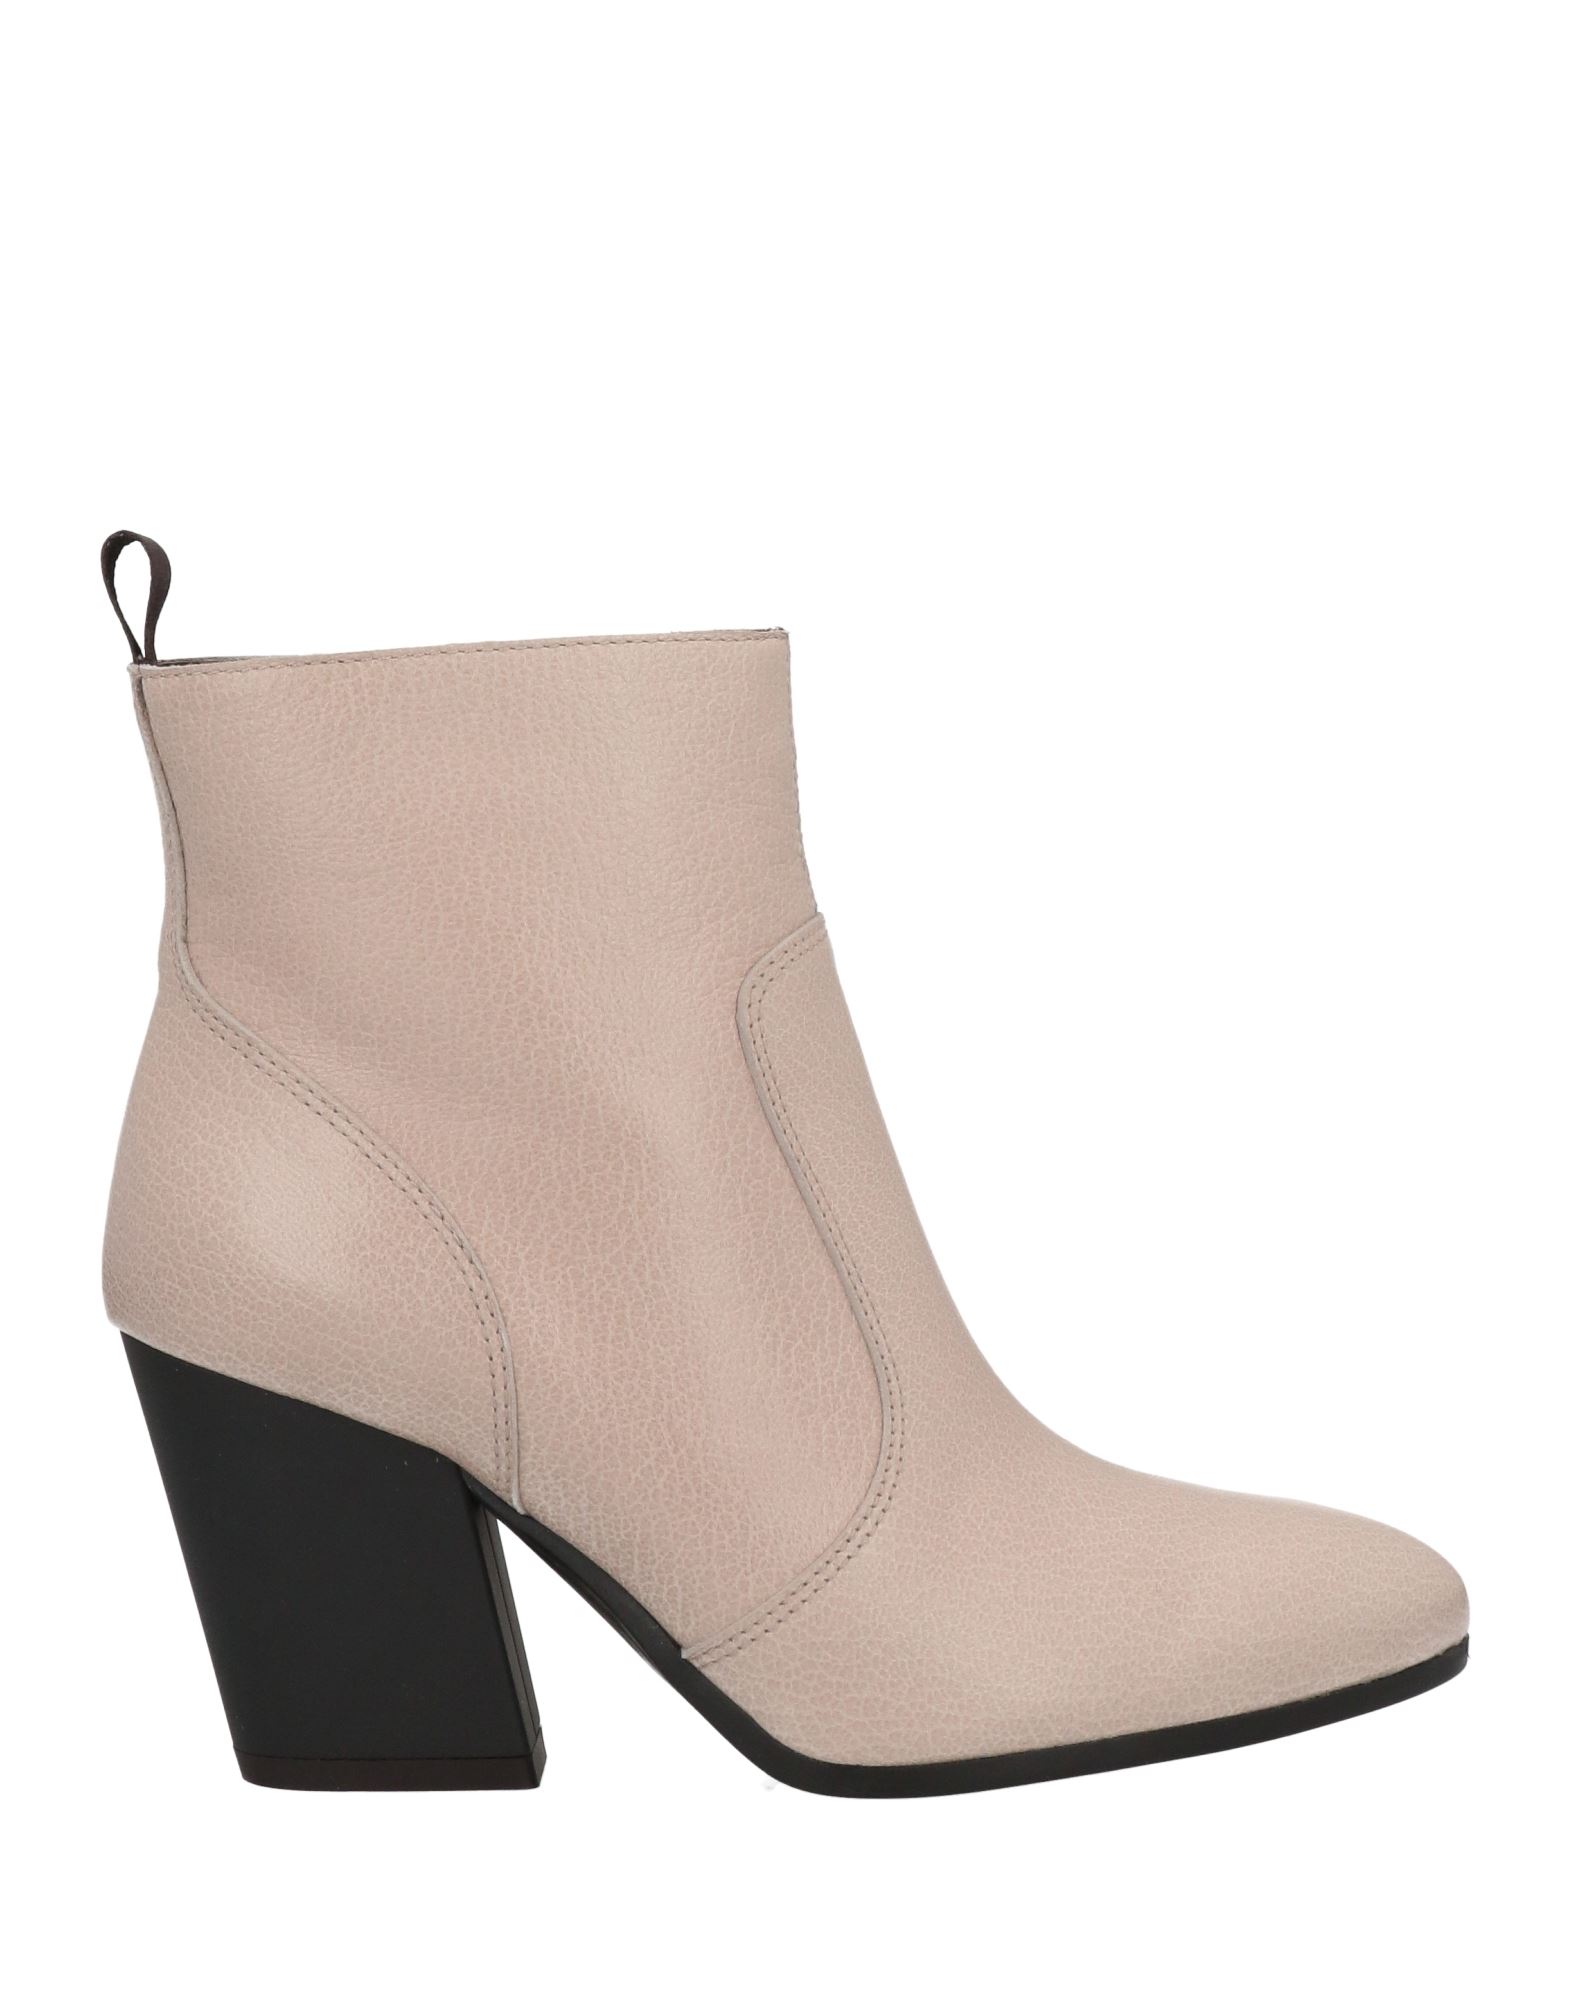 Hogan Ankle Boots In Beige